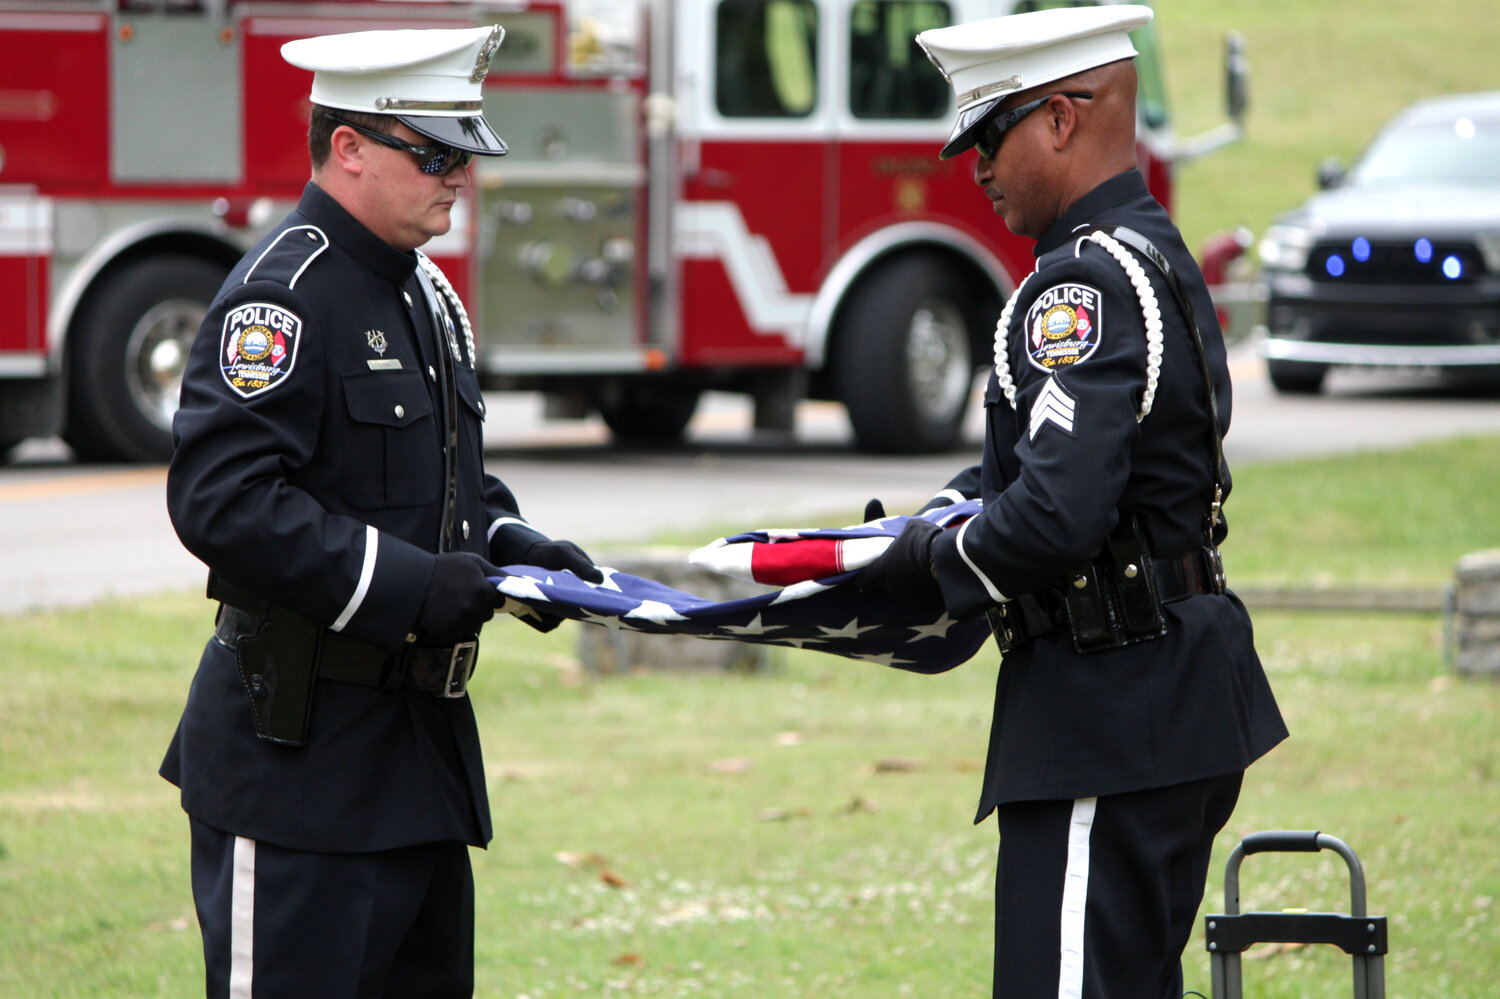 Detective Santiago McKlean (right) and Officer Dustin Turner (left) of the Lewisburg Police Color Guard as they present the colors for the ceremony. 